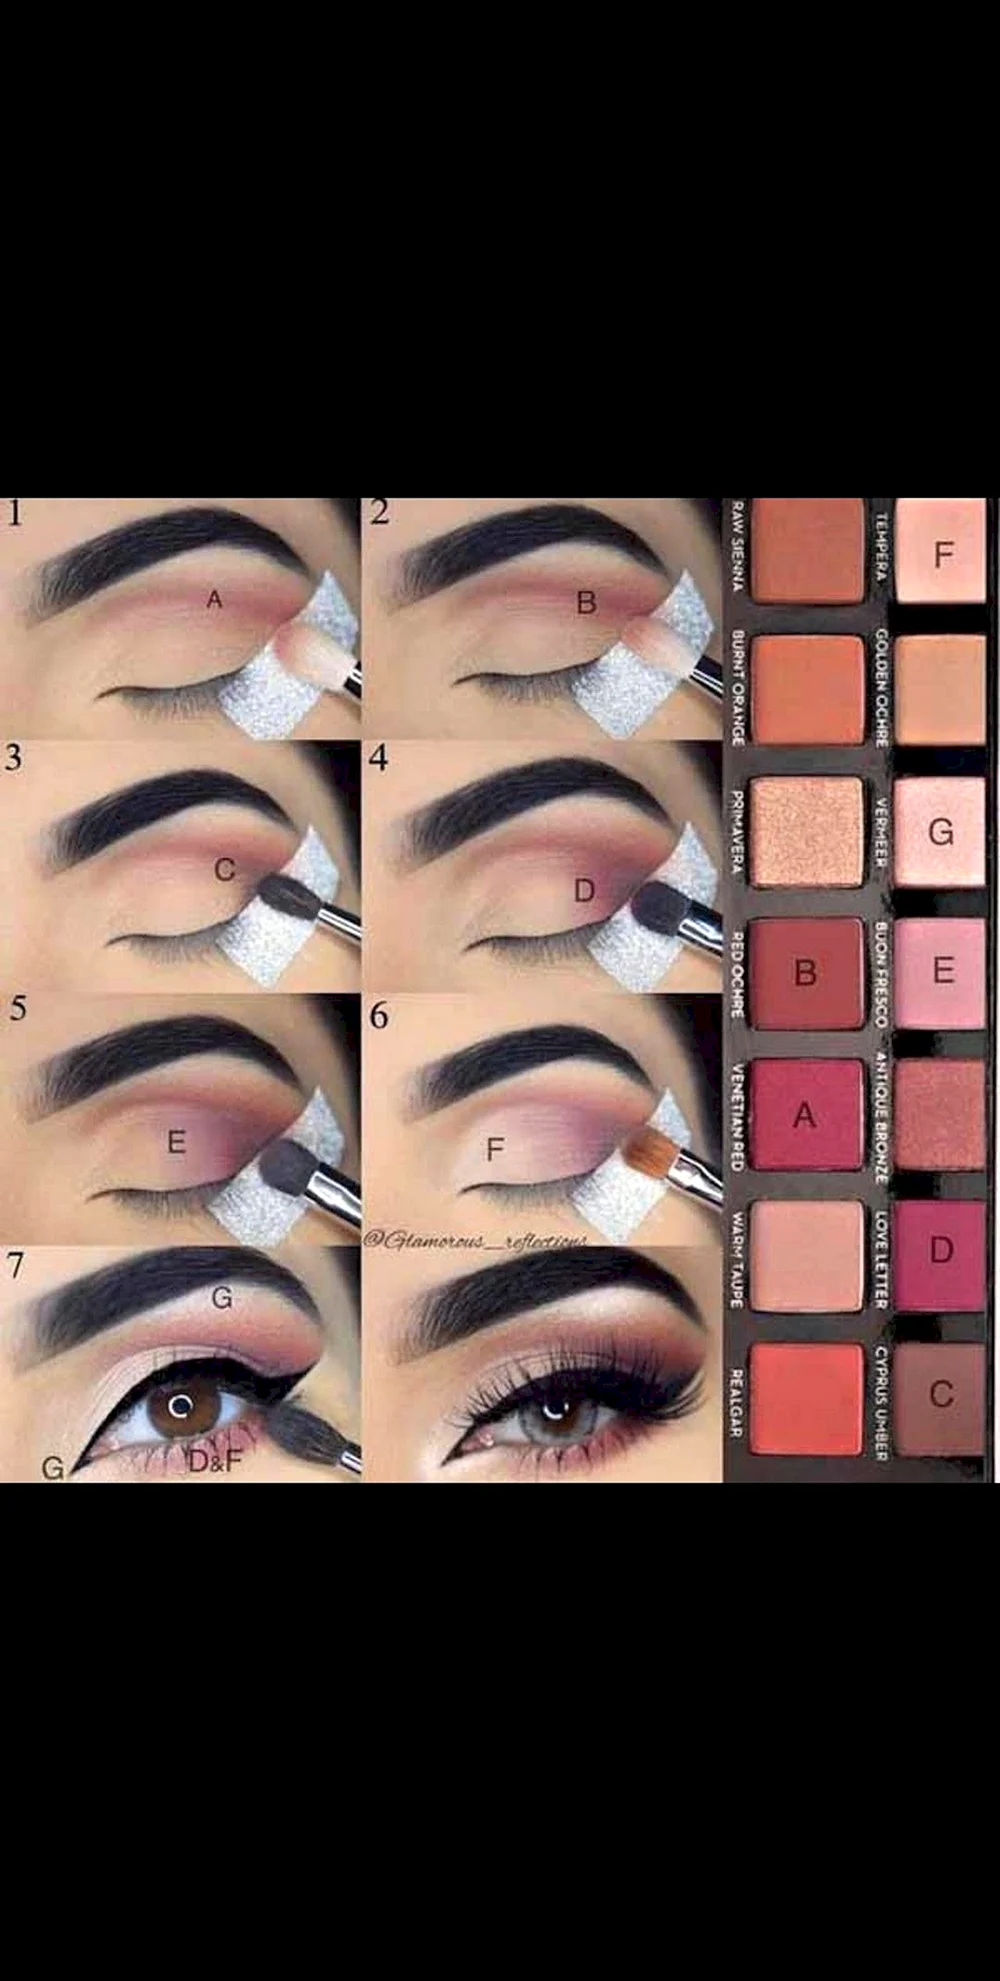 How to apply Eyeshadow